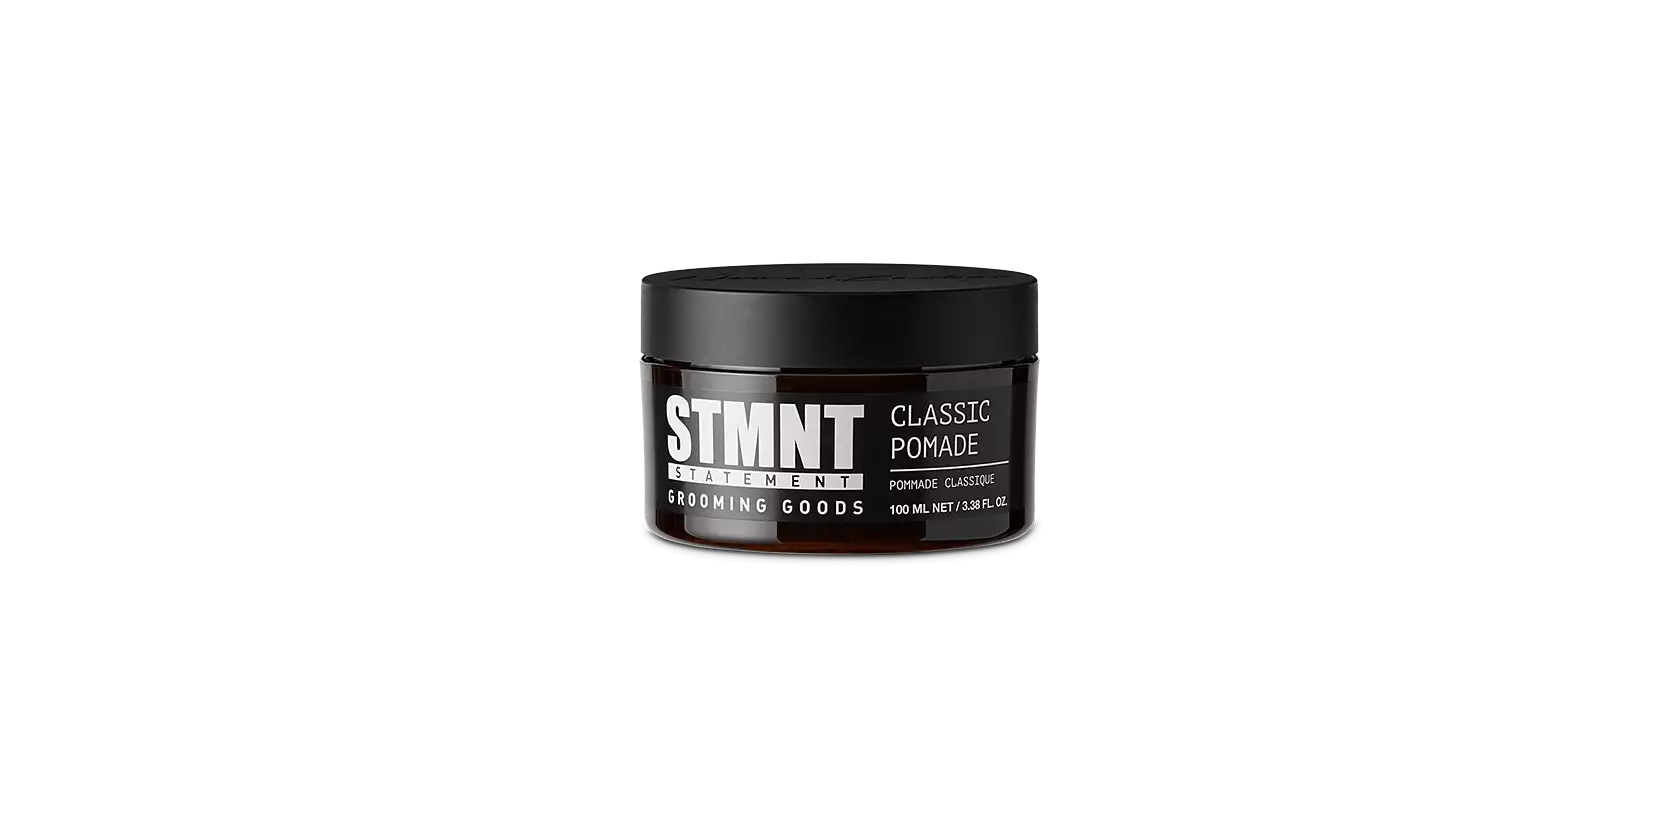 STMNT Grooming Goods Classic Pomade 3.38oz